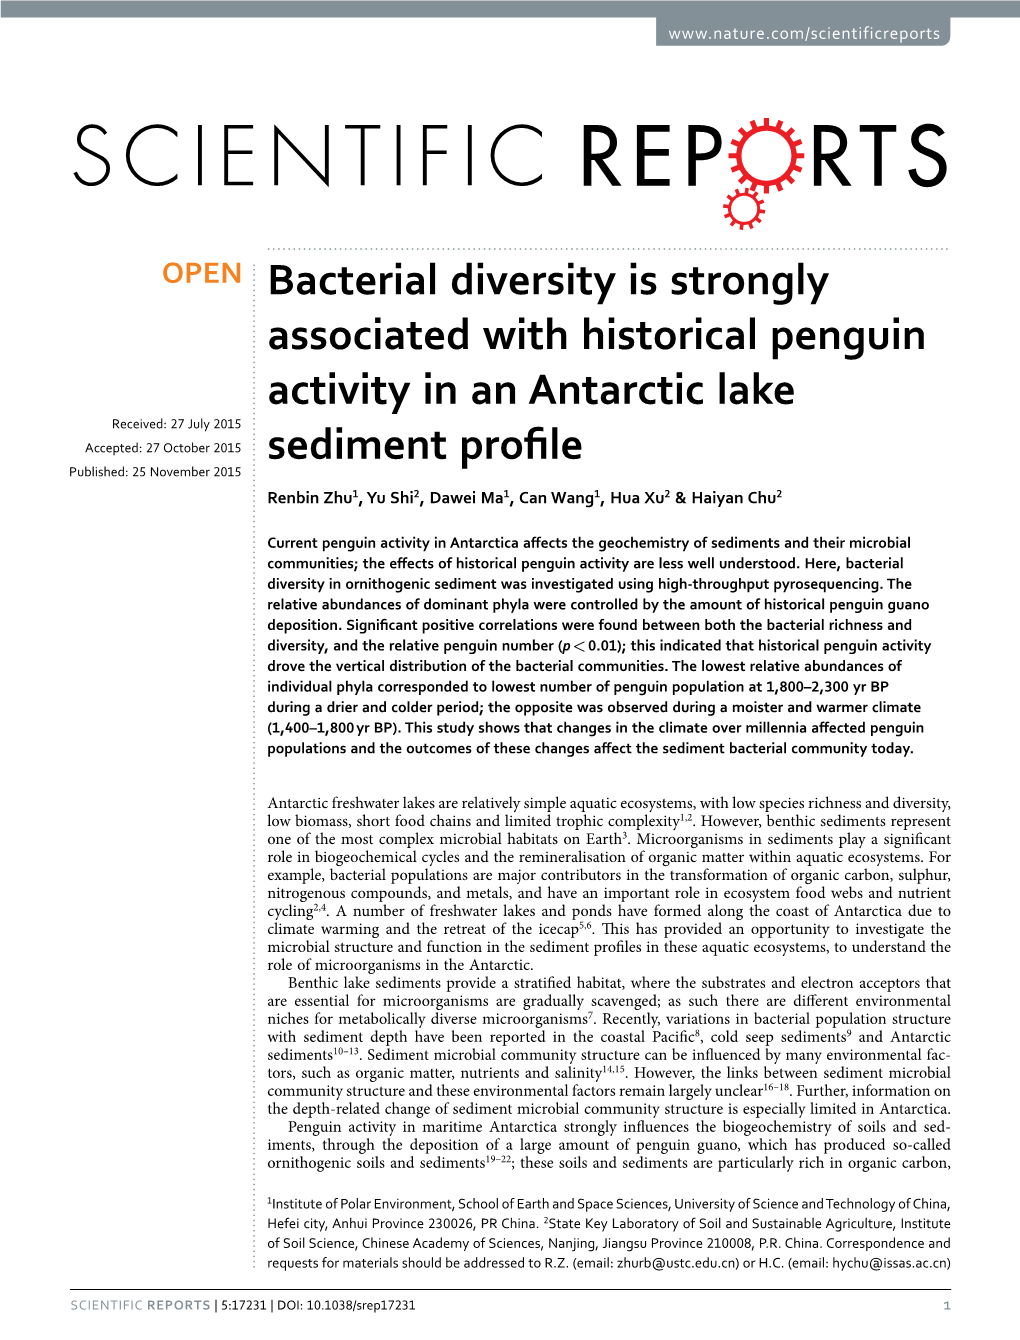 Bacterial Diversity Is Strongly Associated with Historical Penguin Activity in an Antarctic Lake Sediment Profile